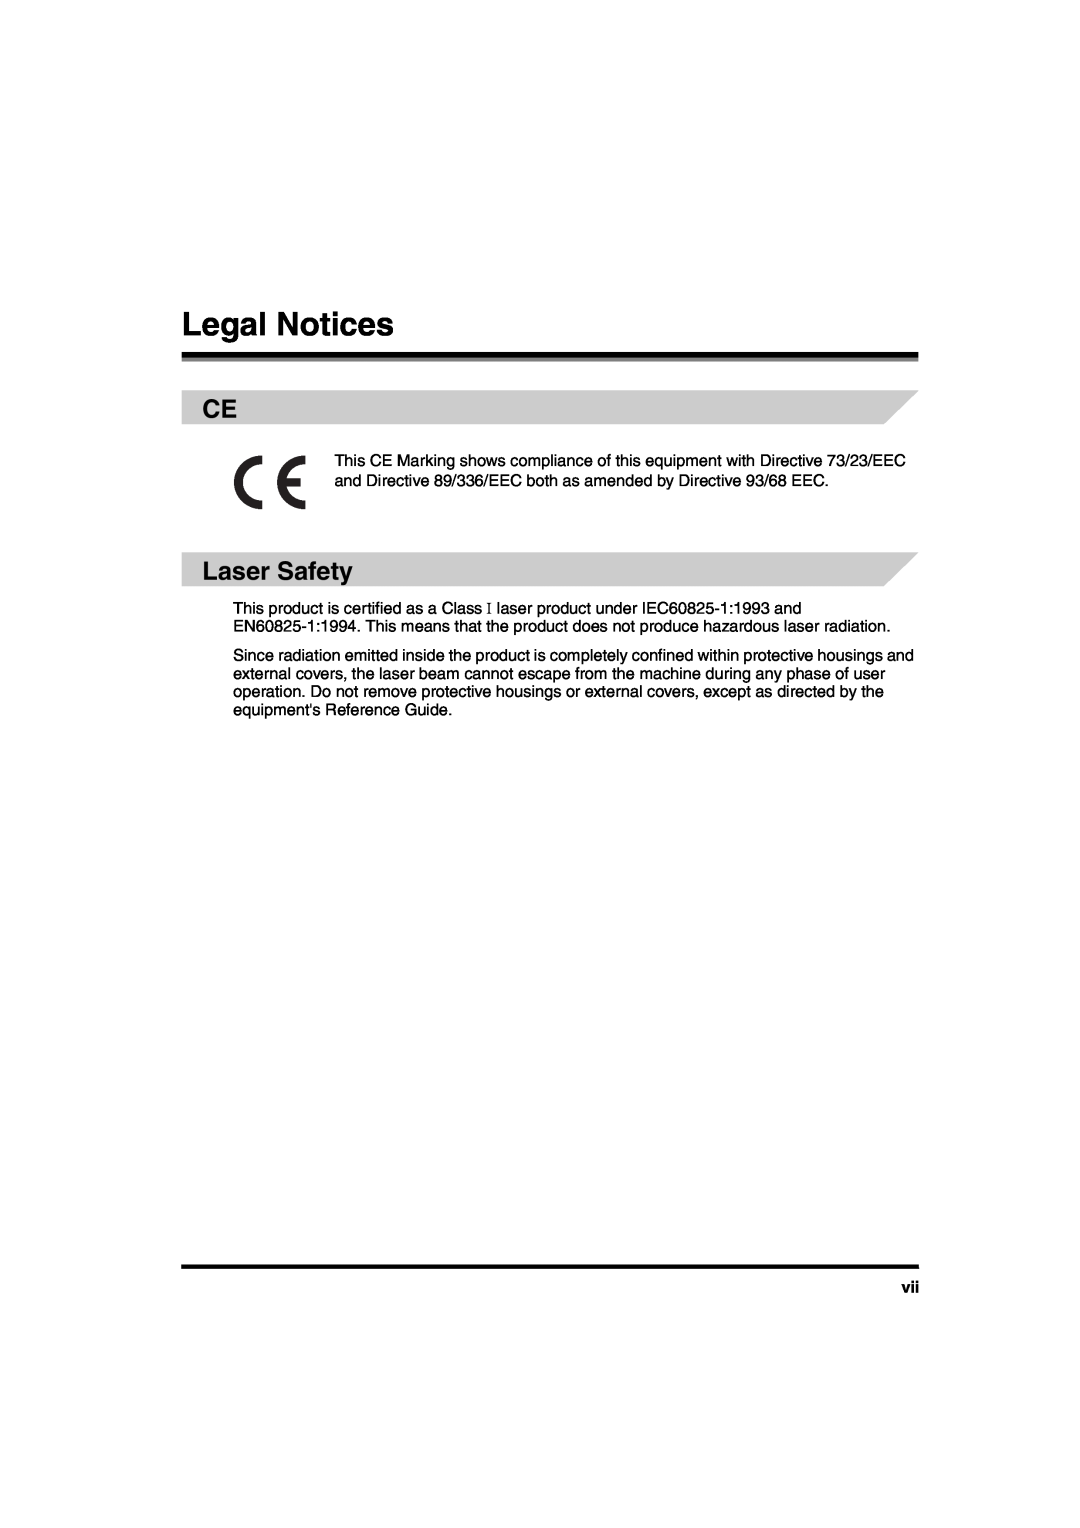 Canon iR6570 manual Legal Notices, Laser Safety 